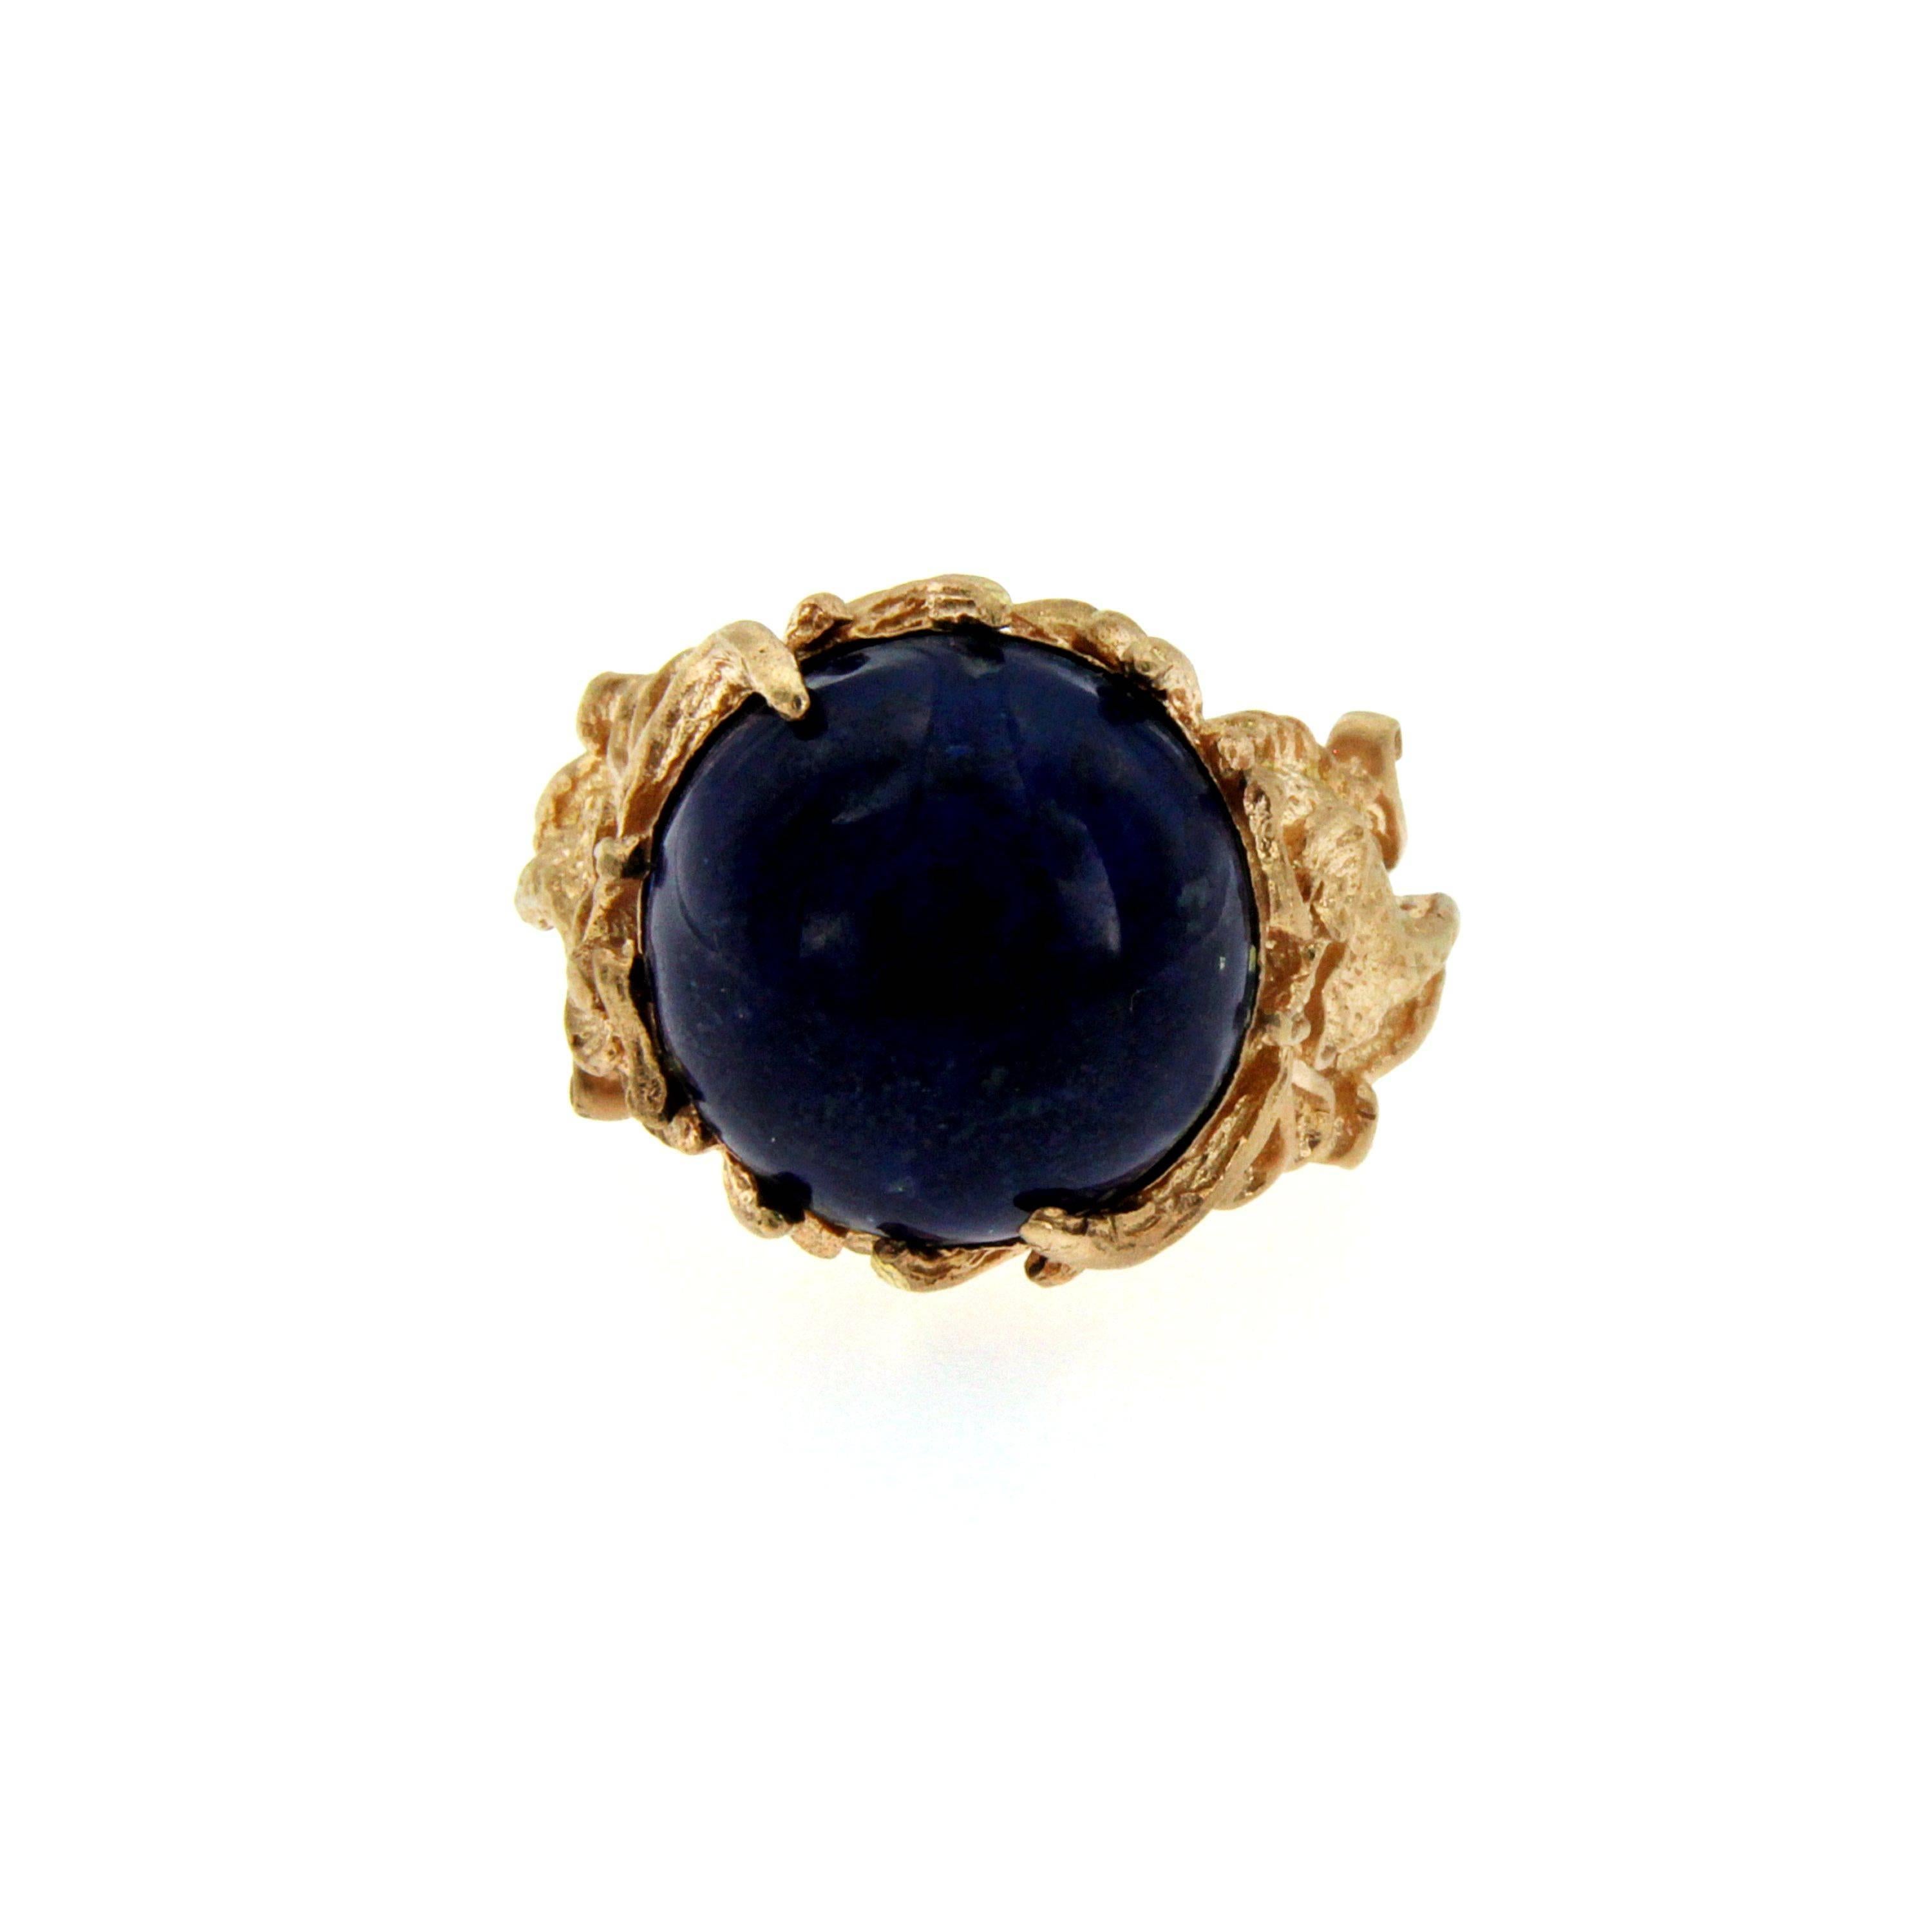 Unique and pleasant unisex Ring mounted in 18k Rose Gold.
The Ring features a dragon sculpture at two sides and a sparkling and large blu lapis. 

CONDITION: Brand New
METAL: 18k Rose Gold 
GEM STONE: Lapis
DESIGN ERA: Contemporary
WEIGHT: 17.45